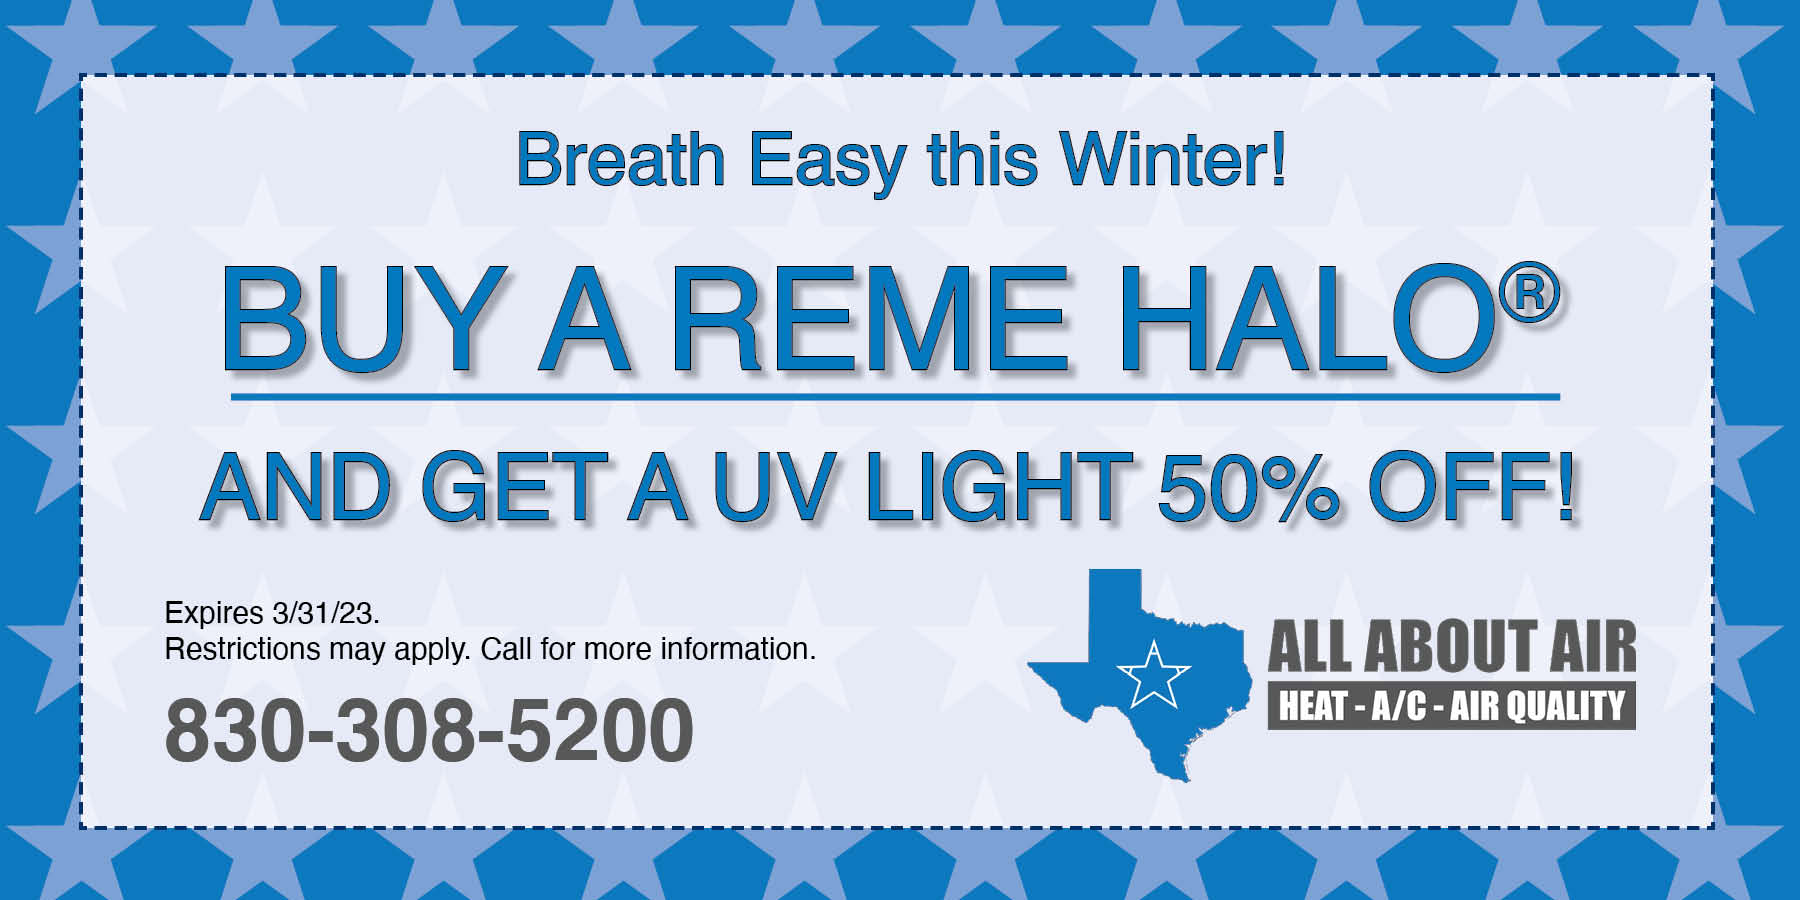 Coupon: Buy a Reme Halo and get a UV light 50% off. Expires 3/31/2023. Call now 830-308-5200